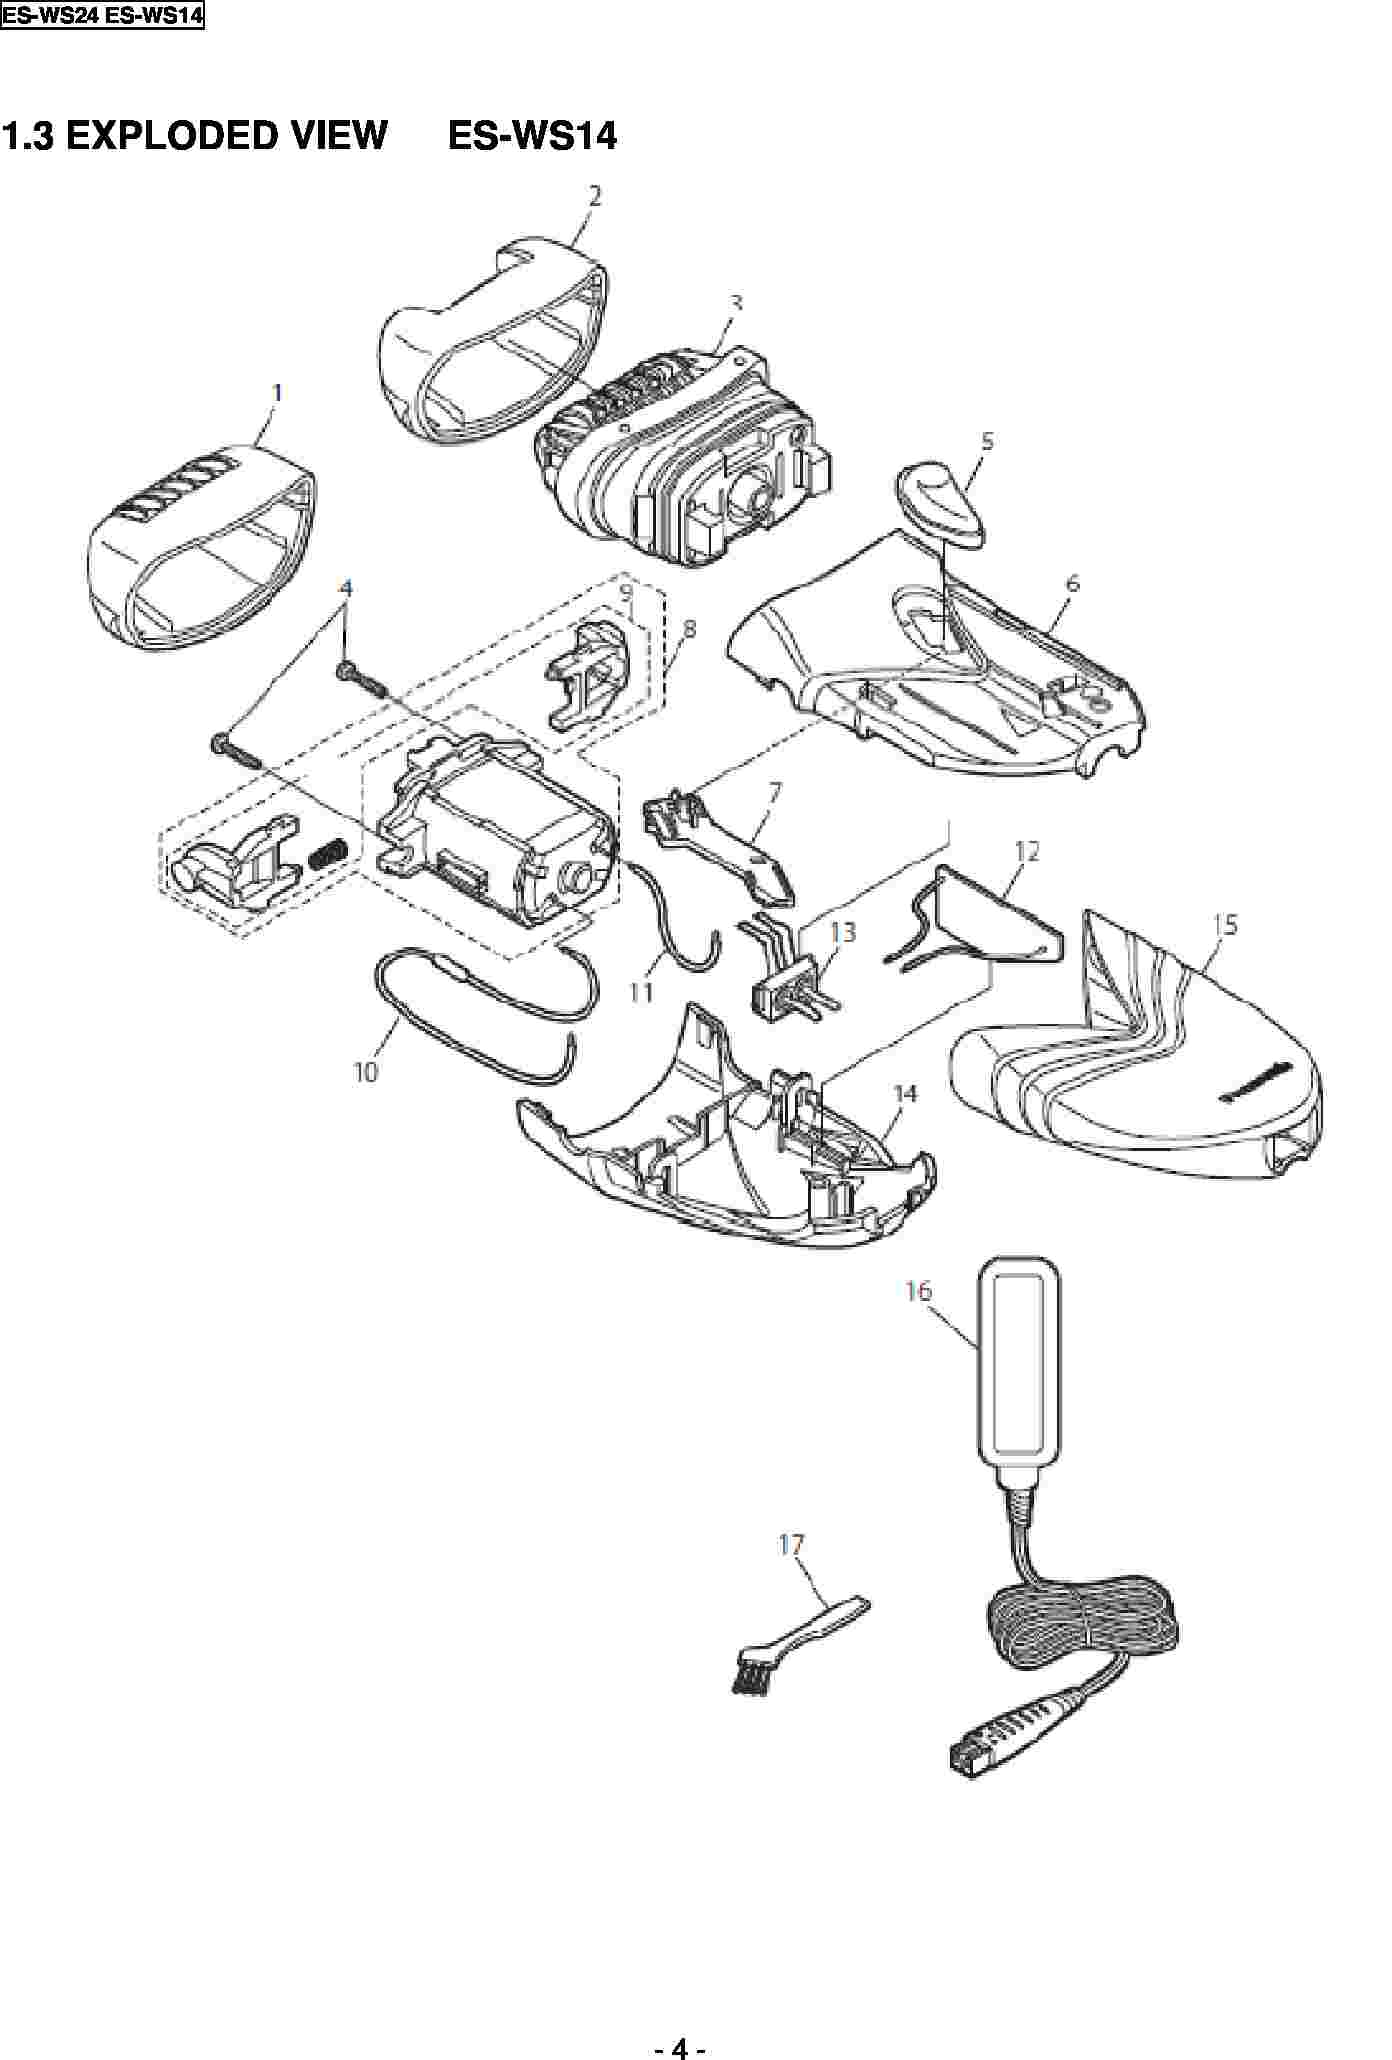 ES-WS14: Exploded View